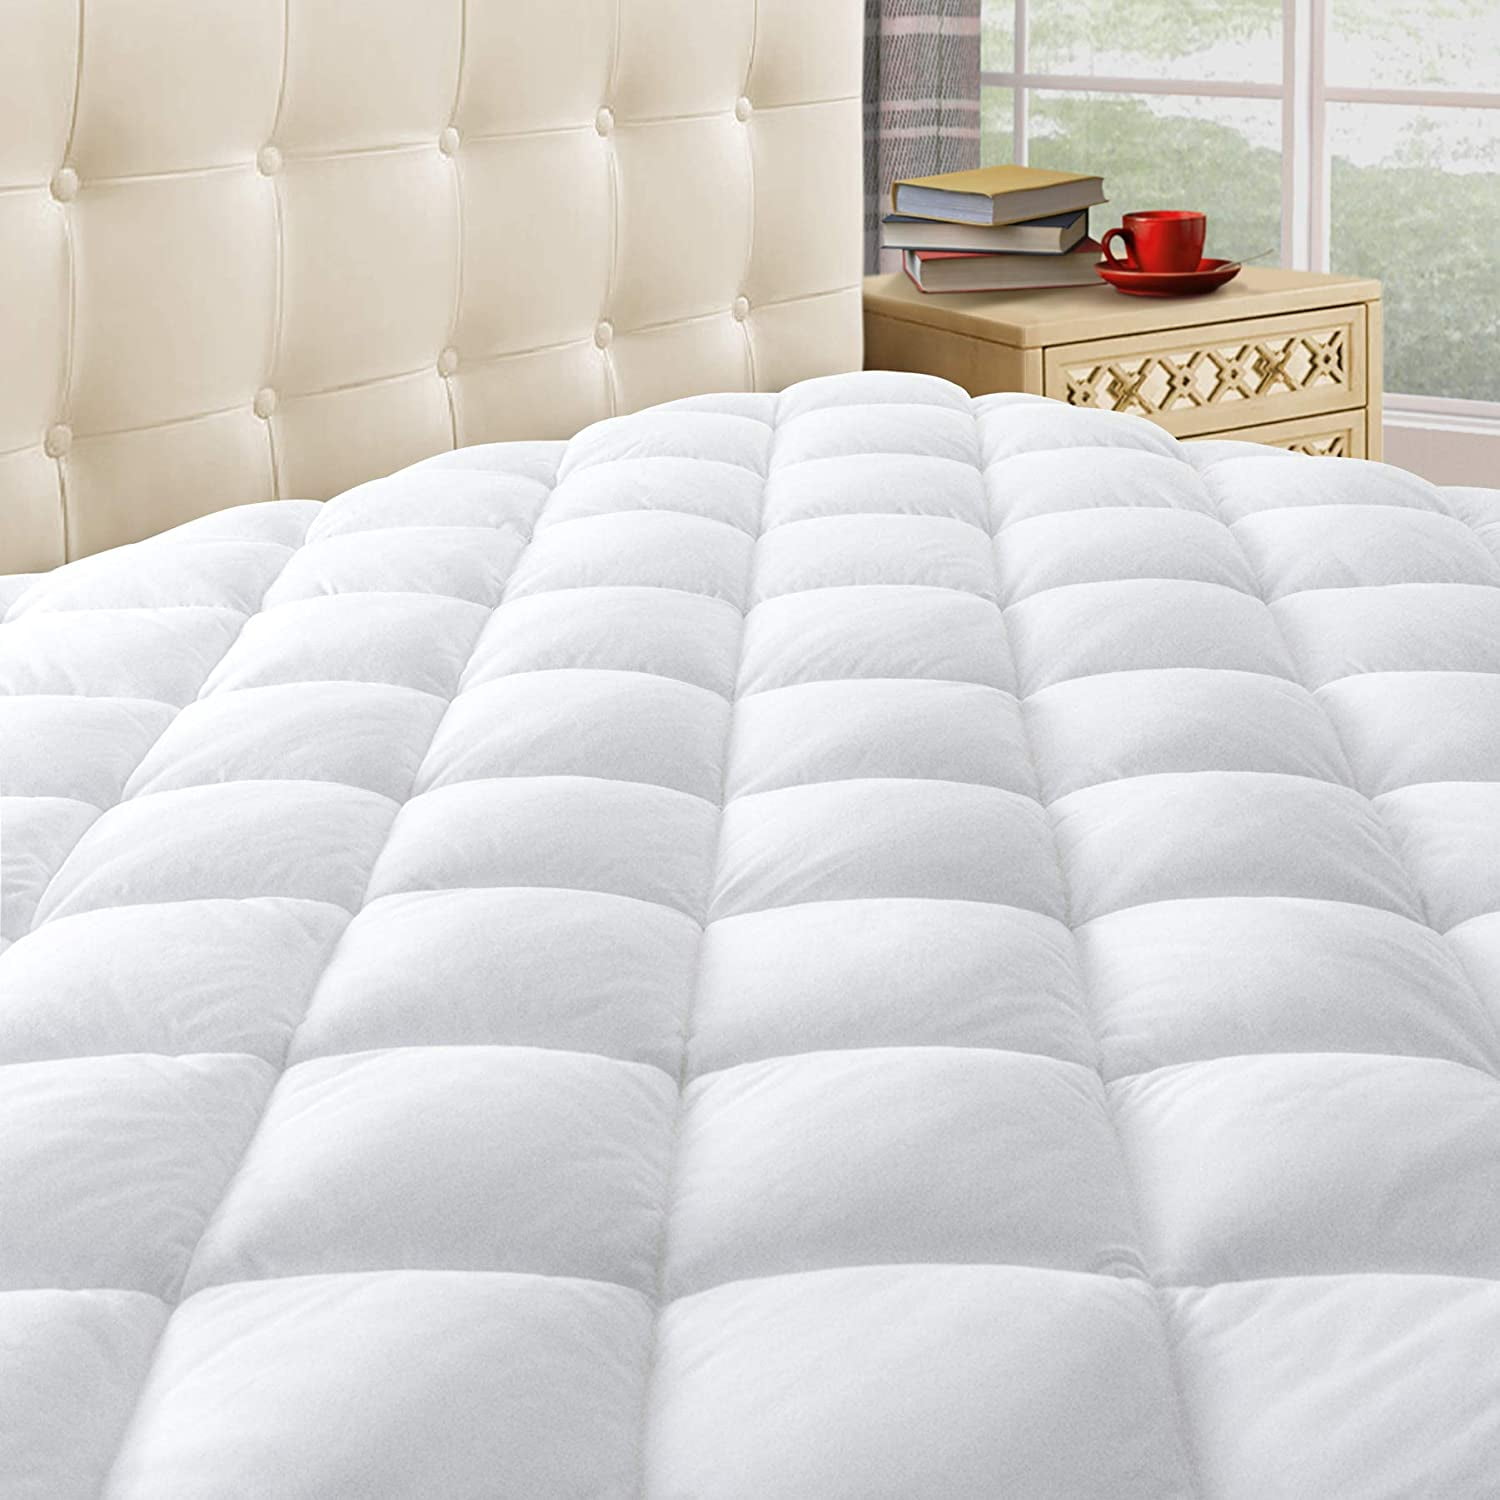 Pillow Top Mattress Cover King Size Bed Topper Pad Soft Hypoallergenic Cooling 